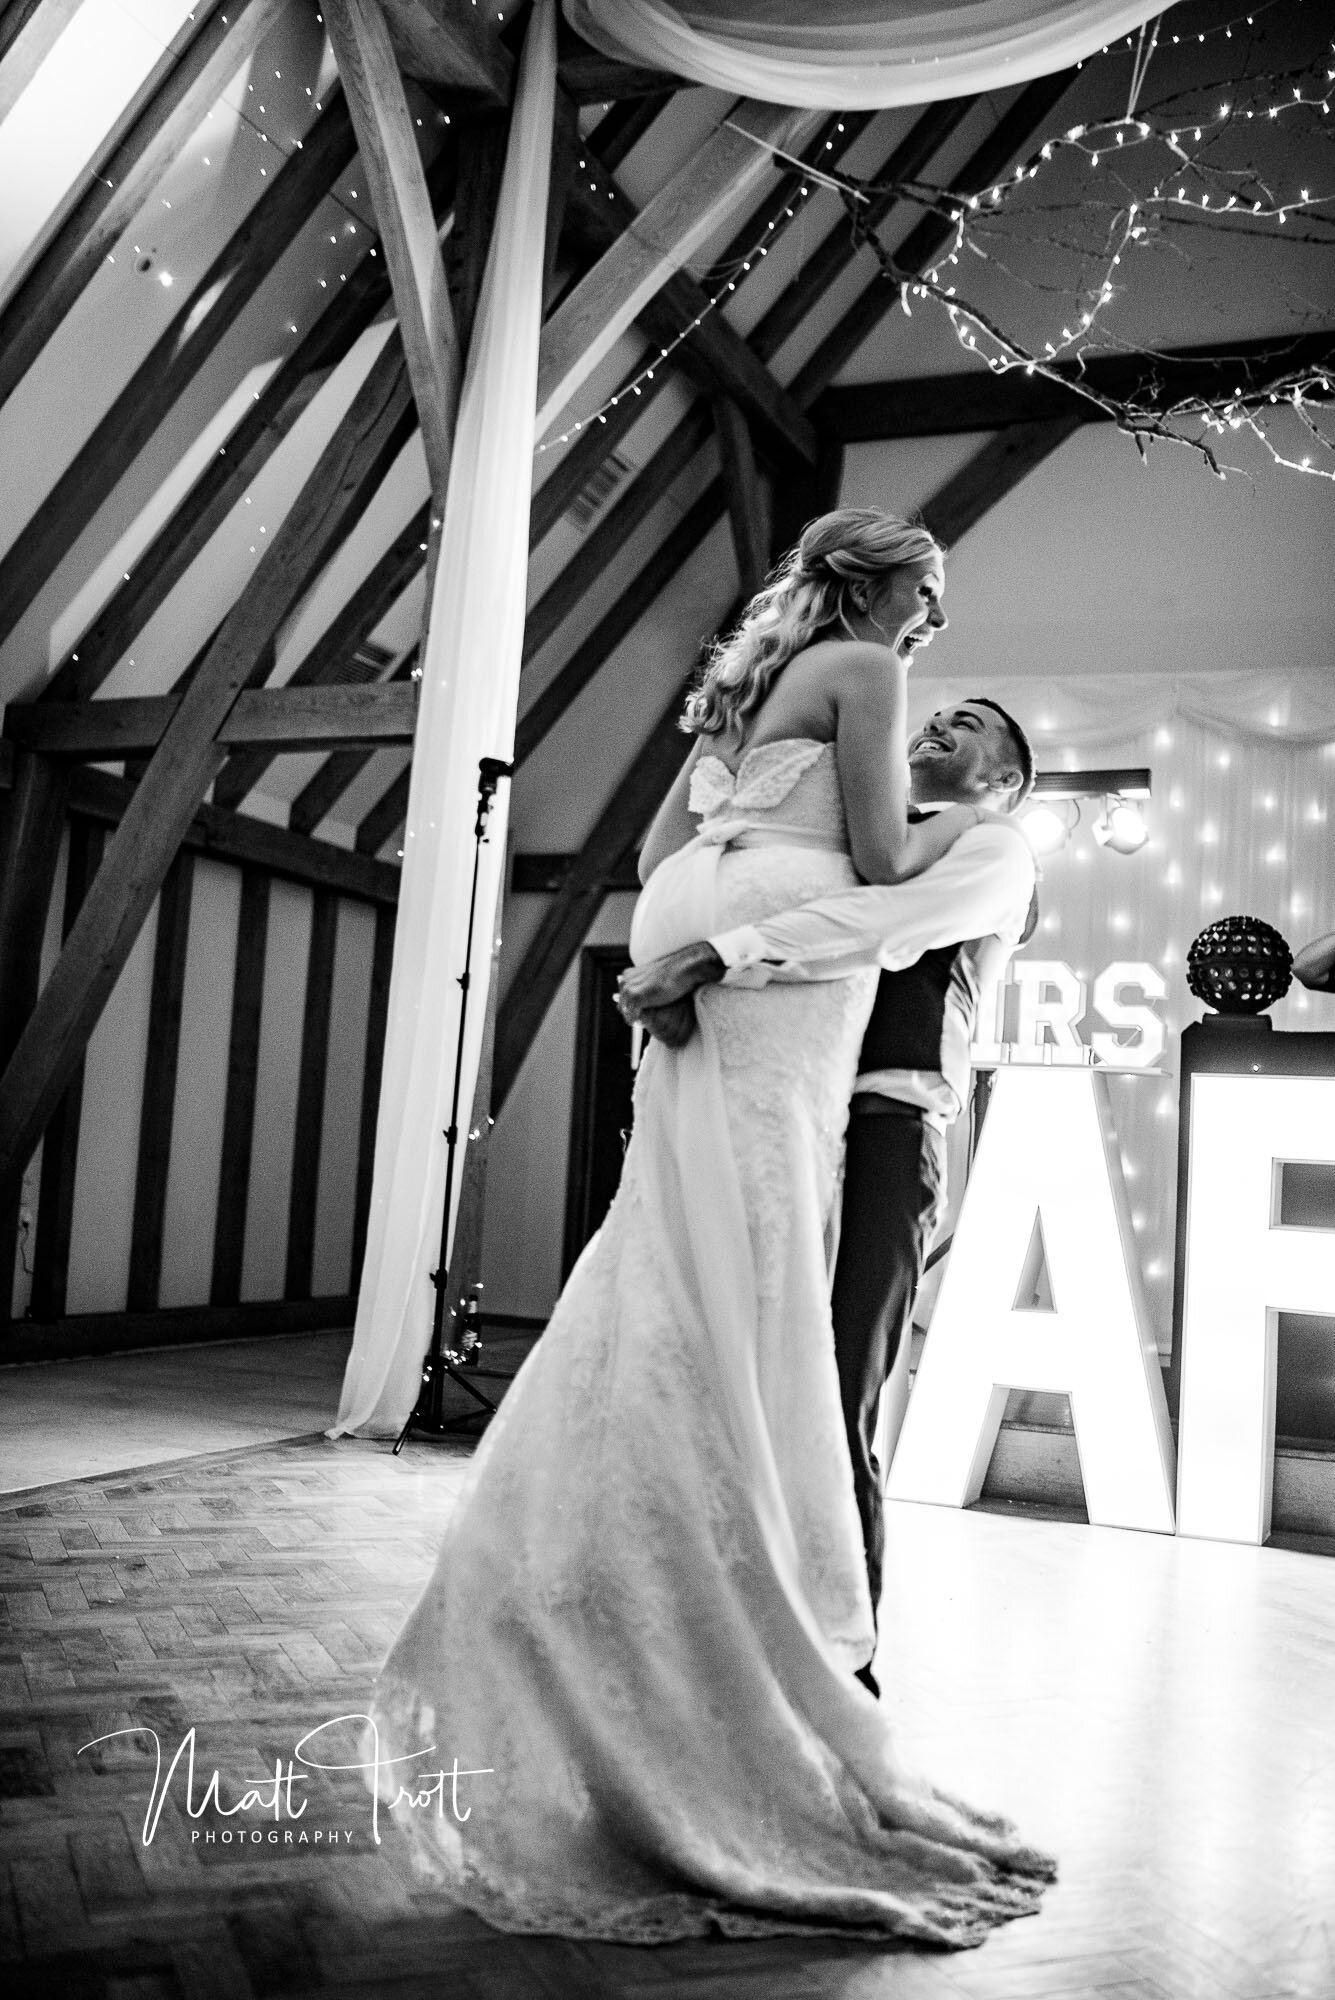 Groom lifting bride during the first dance at the old kent barn